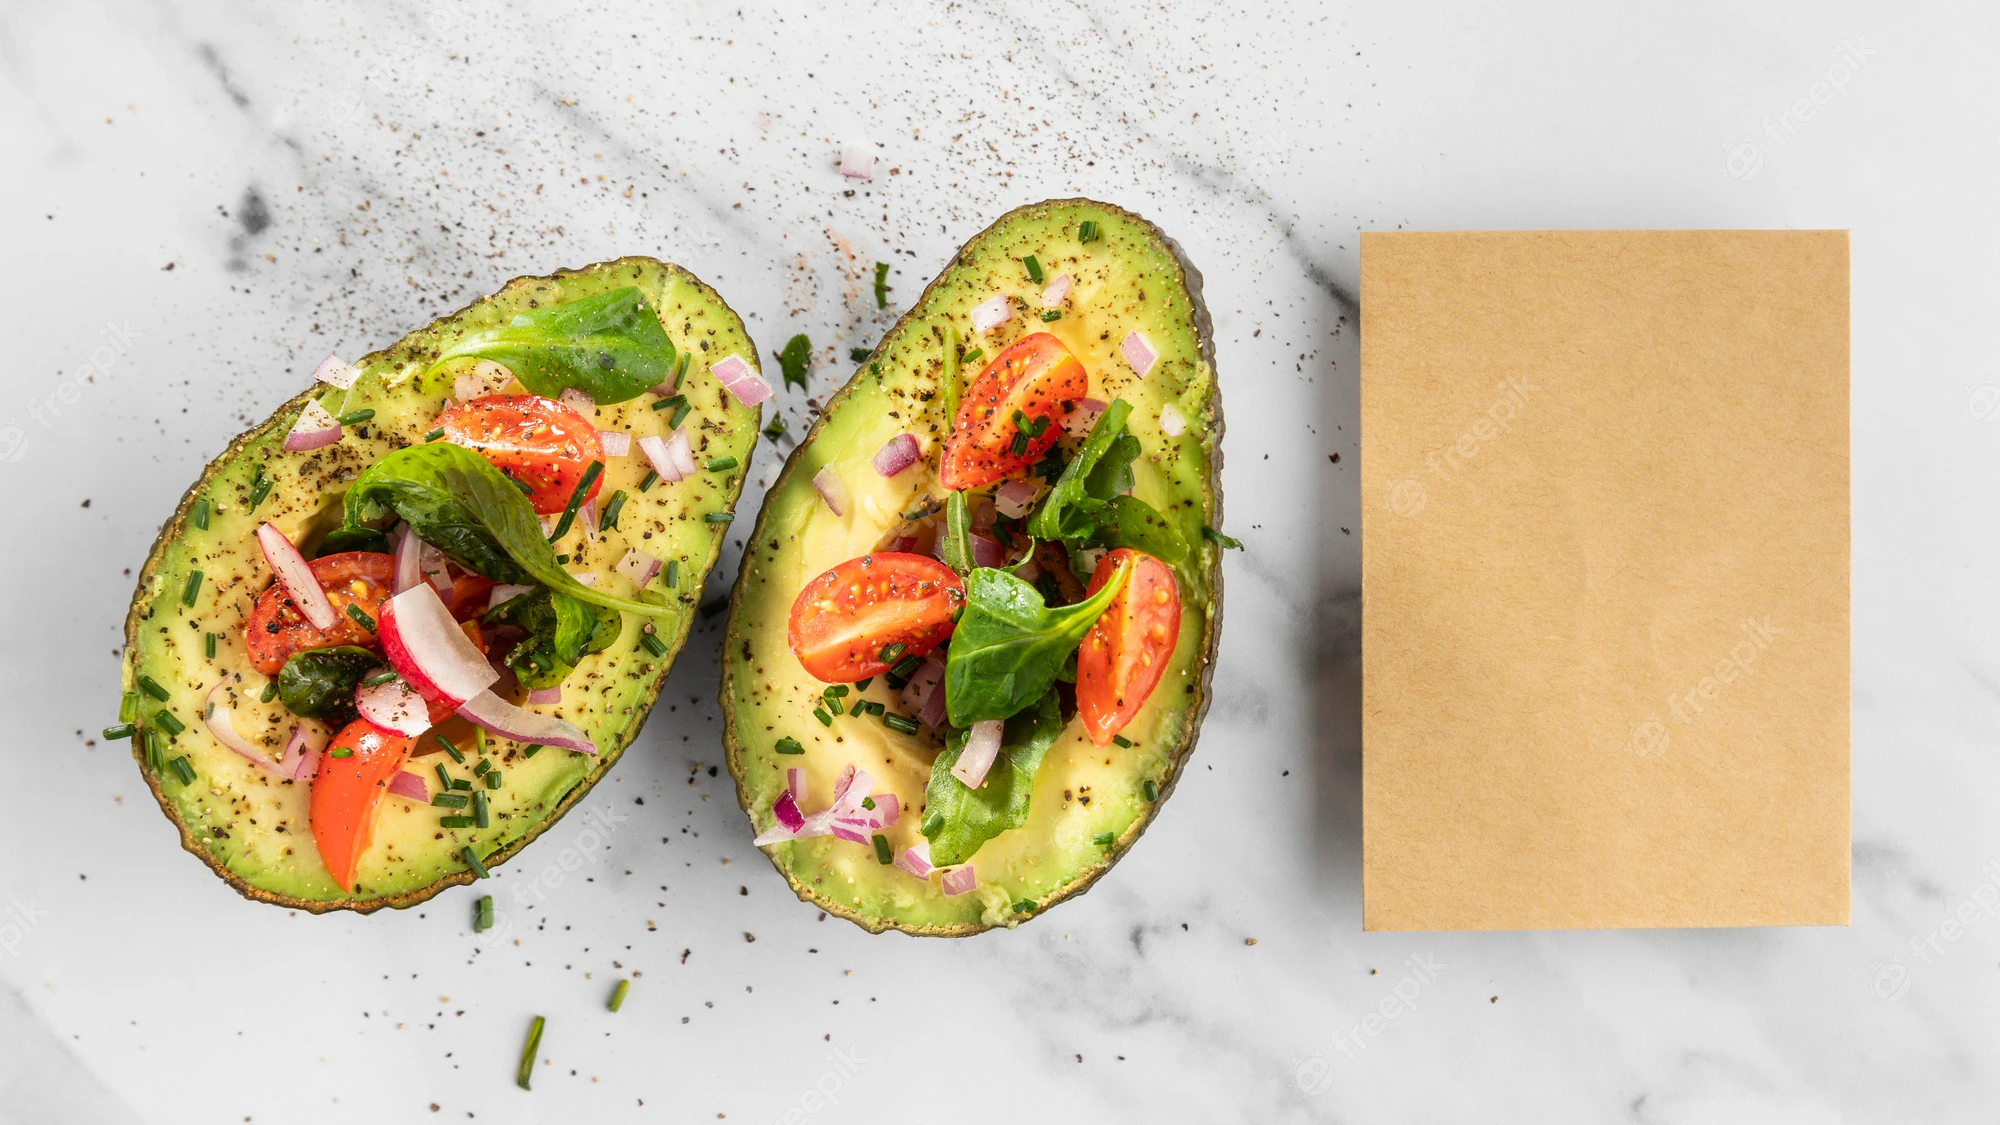 Delicious and Nutritious: 5 Avocado Dishes to Try Today